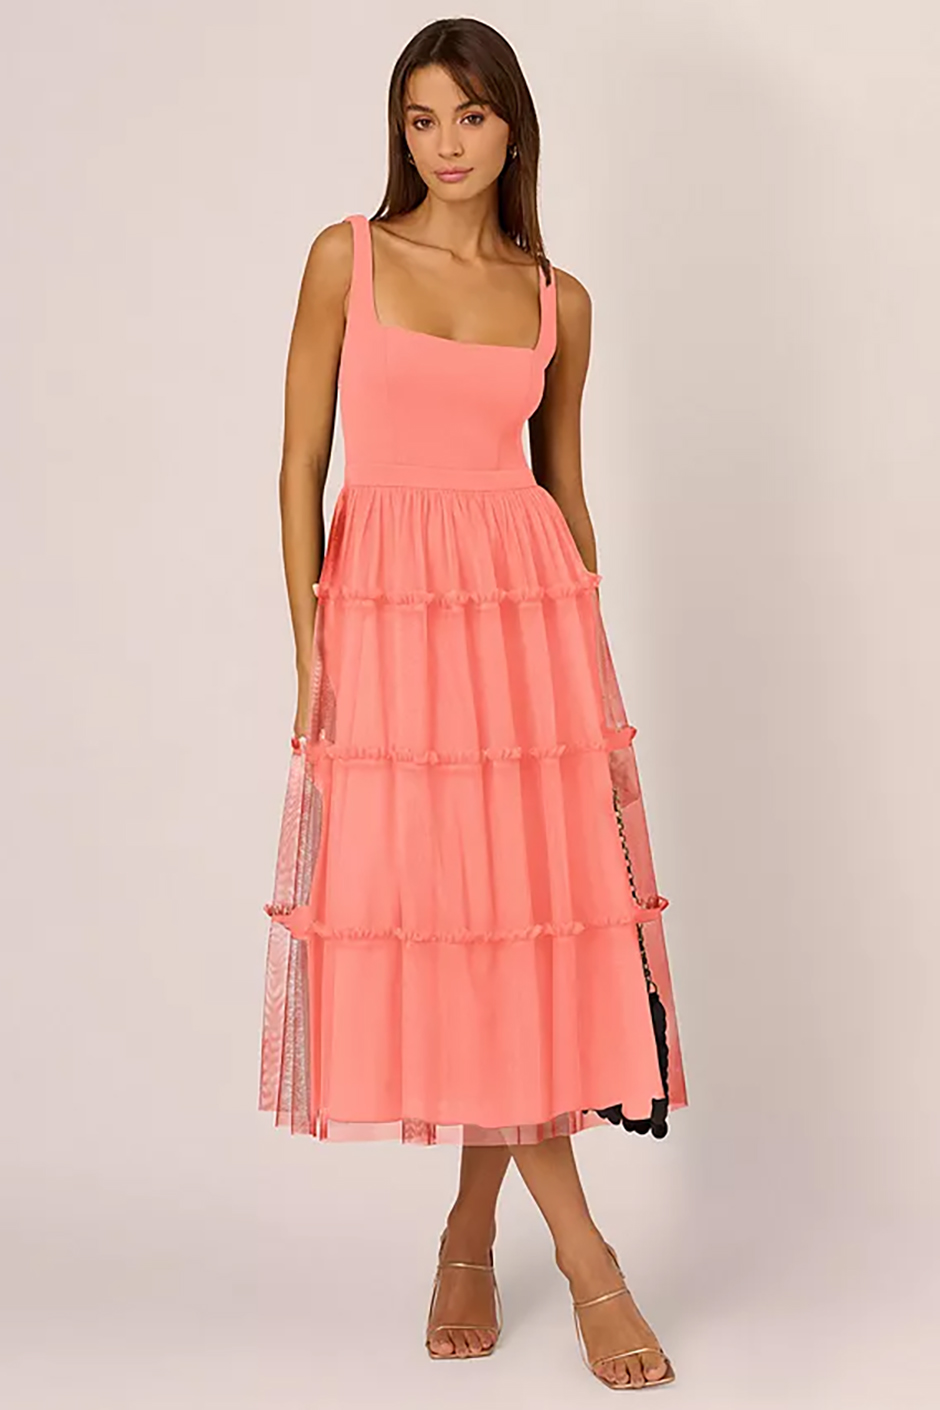 Coral peach bridesmaid dress from Adrianna by Adrianna with midi length and mesh design